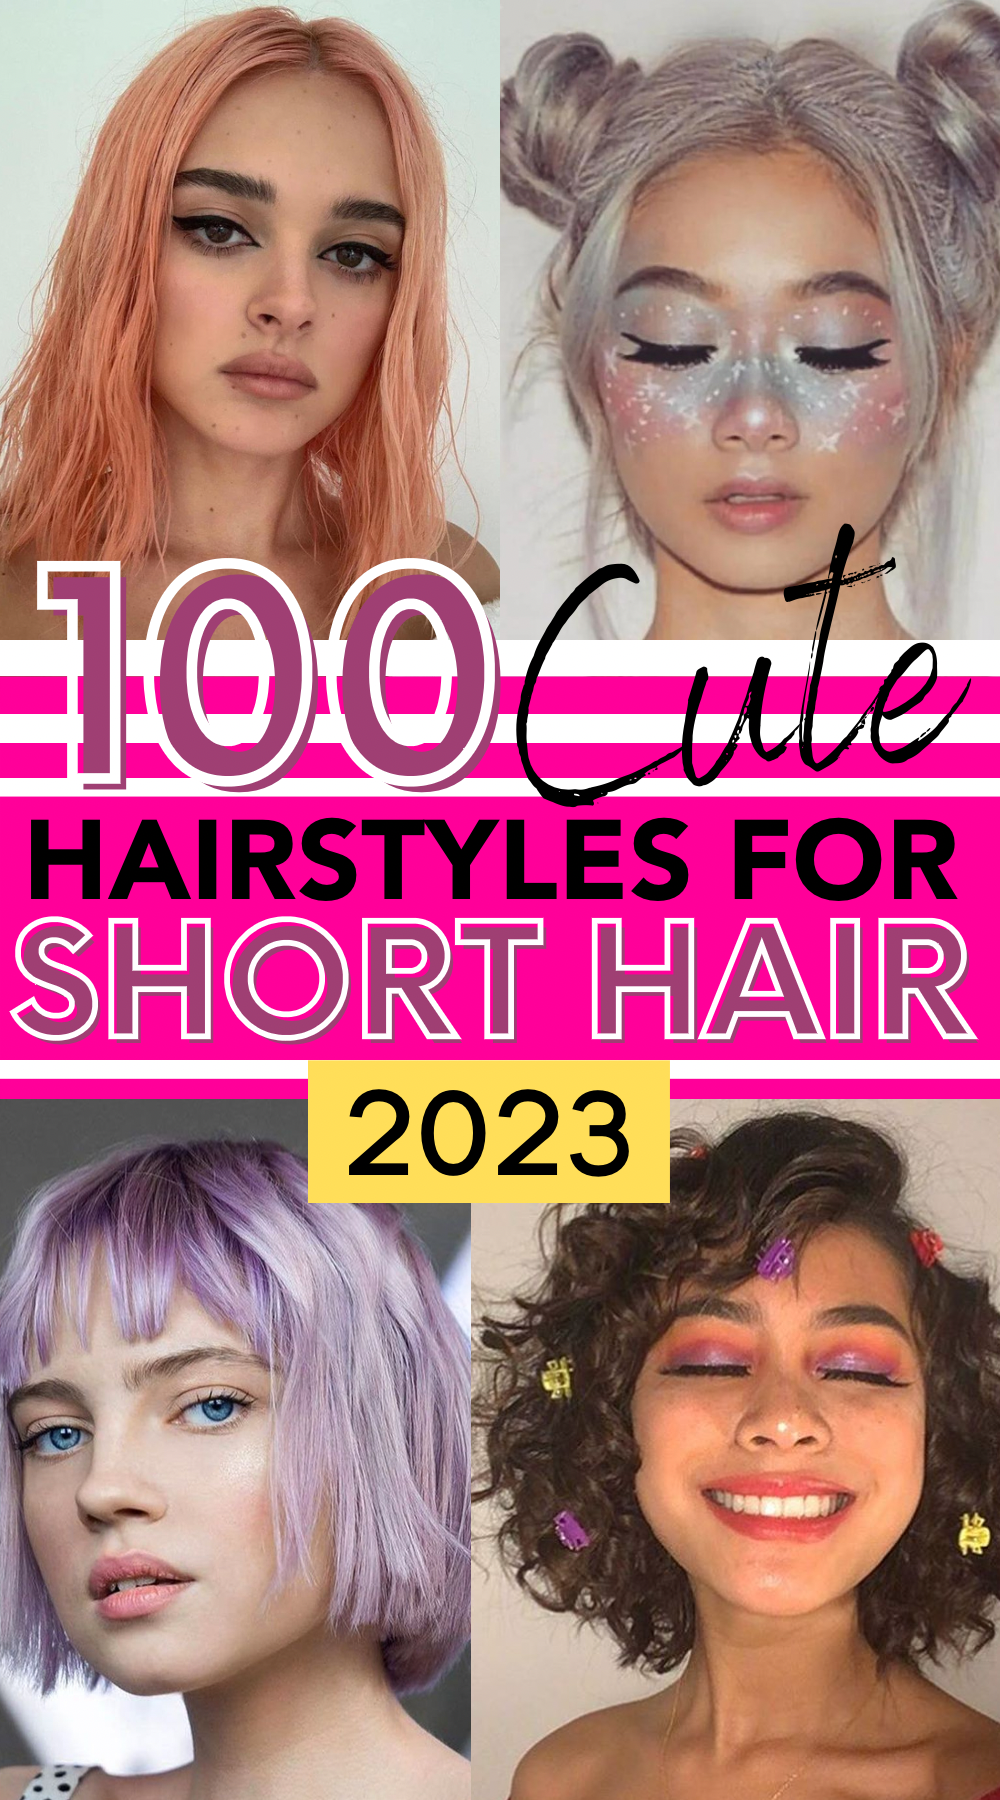 30 1990s Hairstyles That Are Still On-Trend In 2023 | Hair.com By L'Oréal